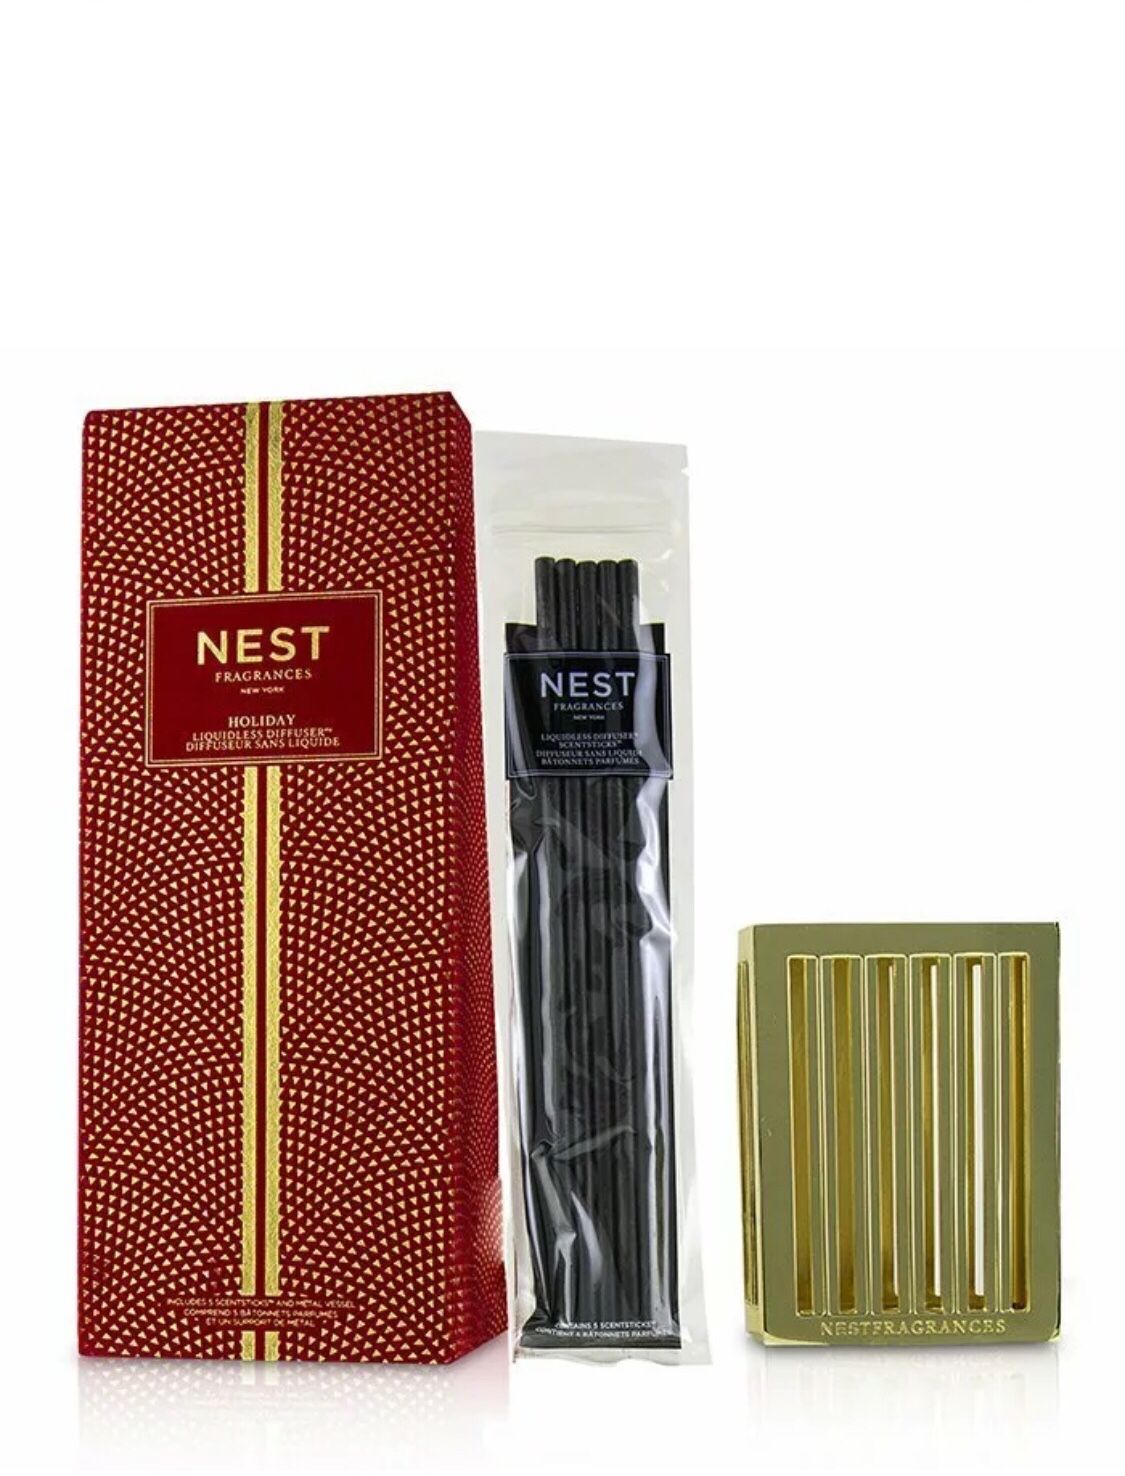 Nest Fragnances Holiday Liquidless Diffuser 5 ScentSticks Brand New in the box Purchased From Nordstrom